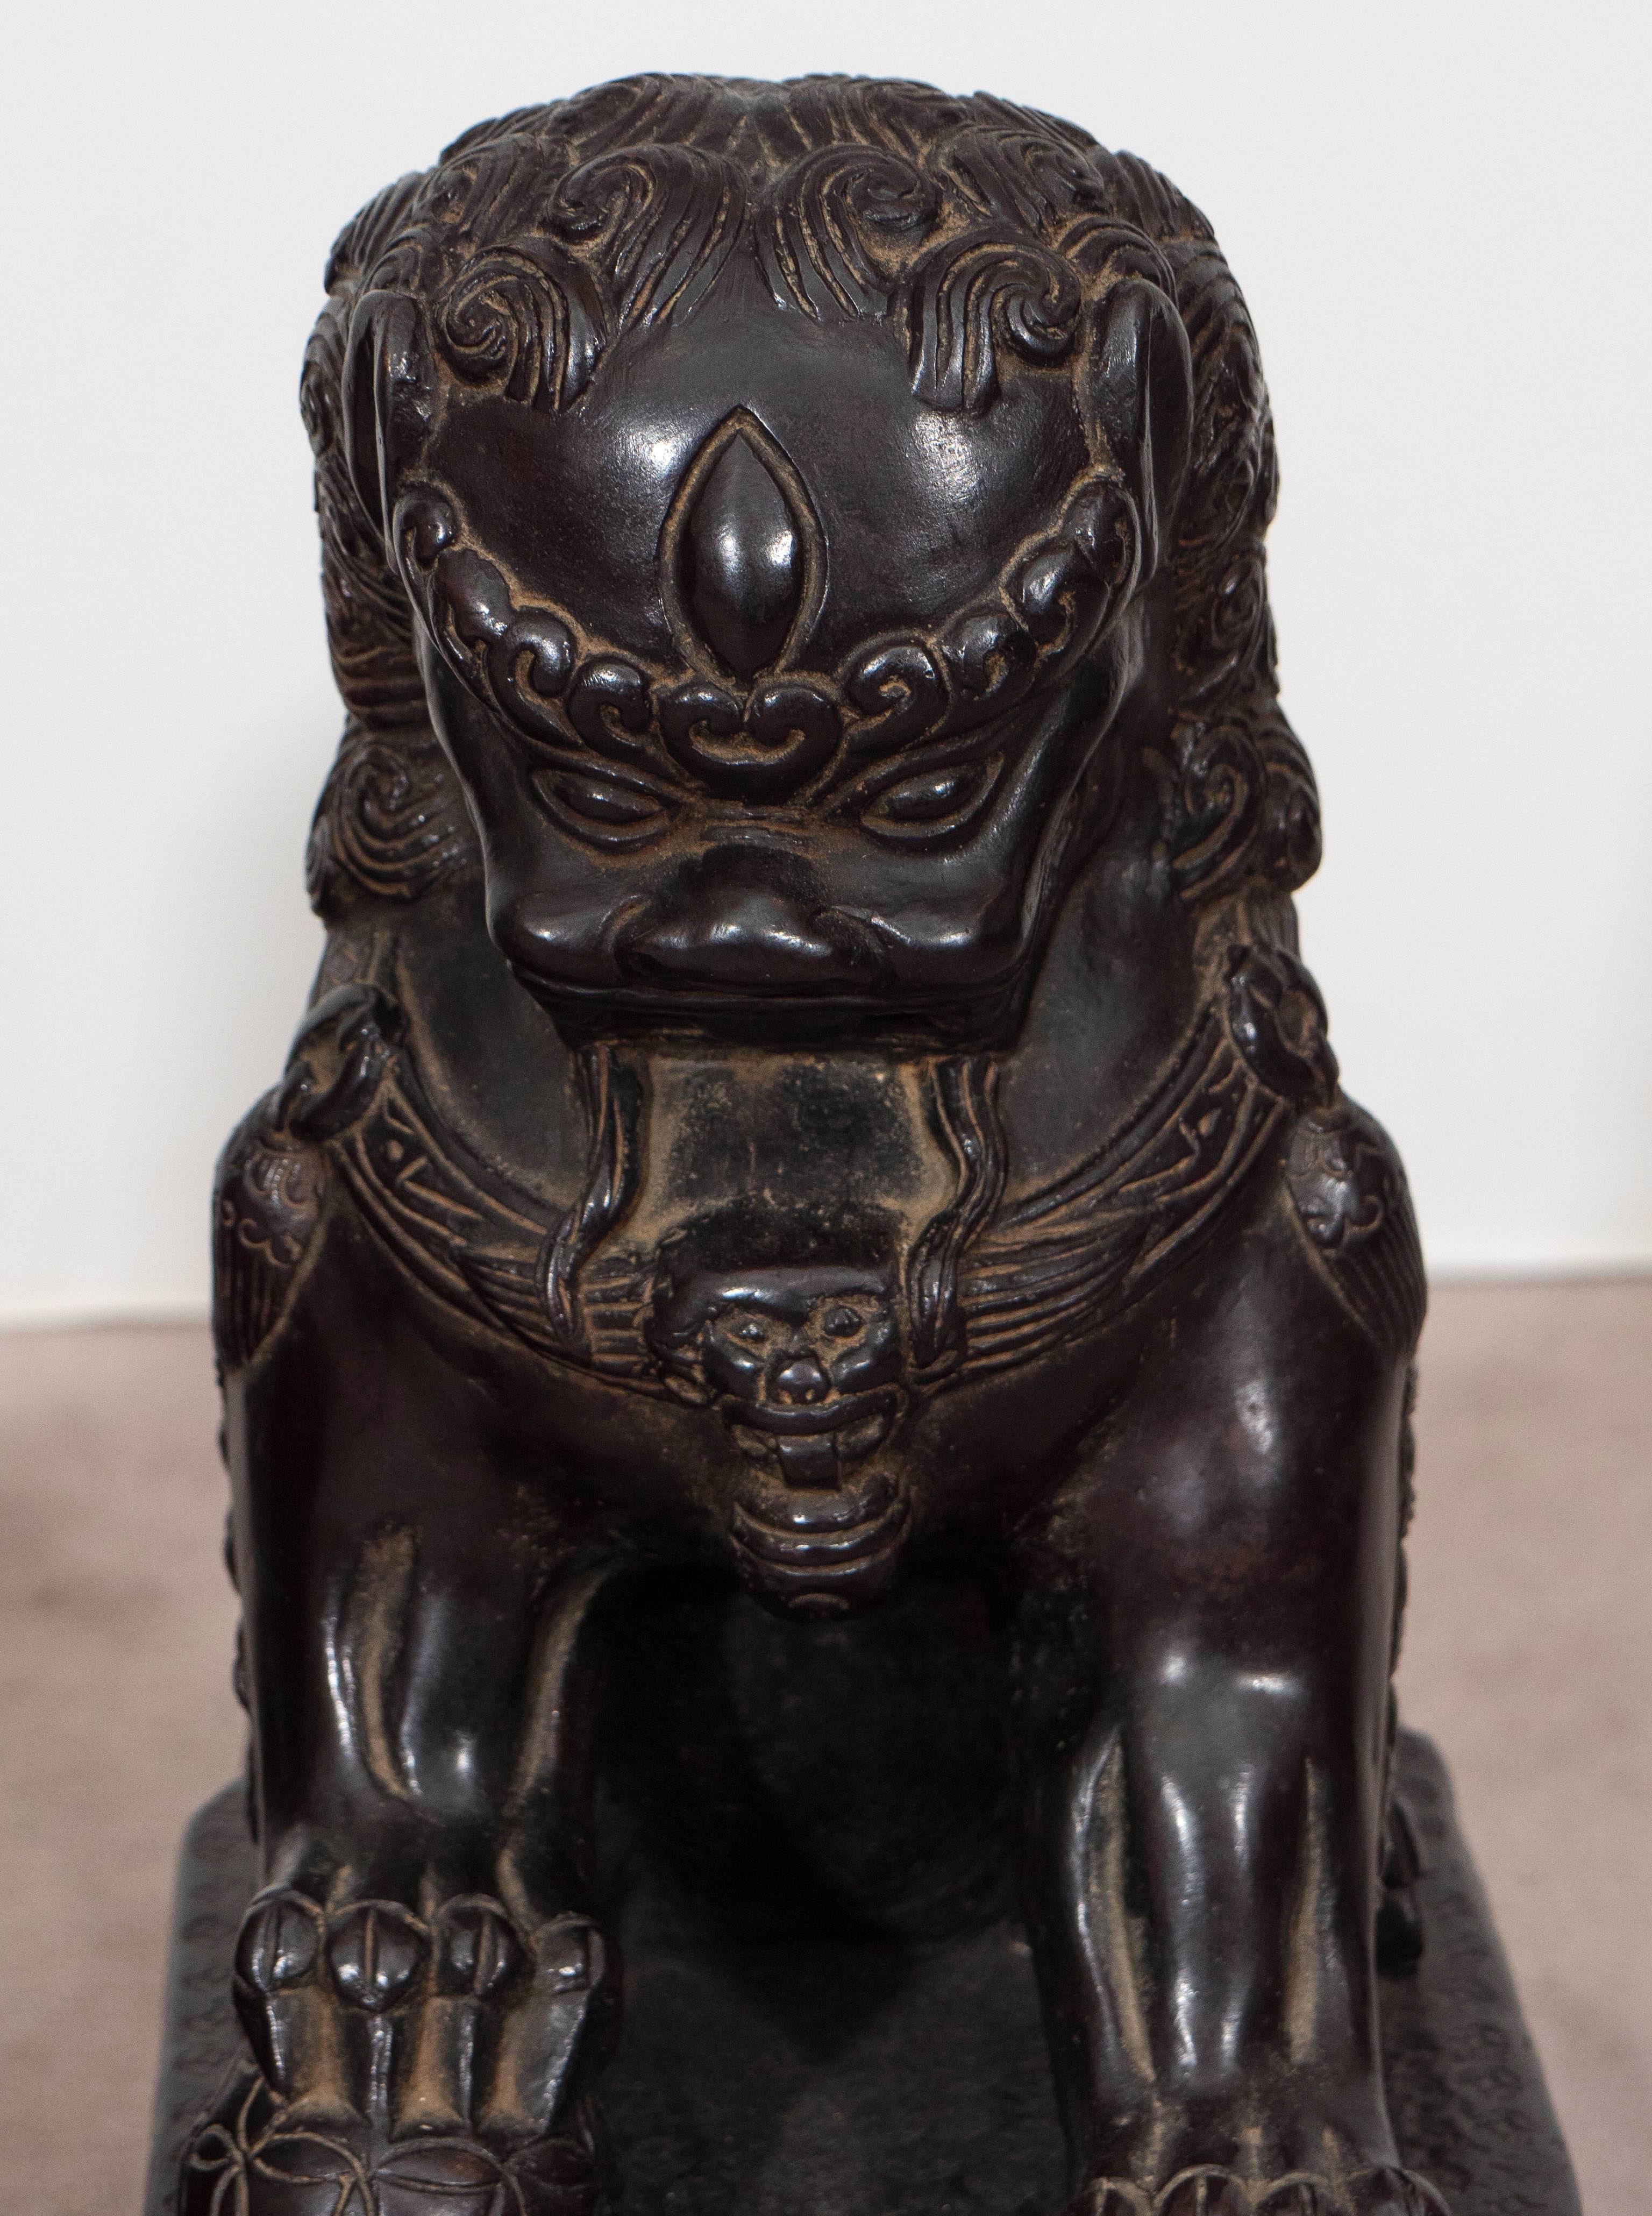 A pair of Foo (alternatively 'Fu') Dog statues, the western name for Chinese Imperial Guardian Lions, in beautiful cast bronze, each depicted standing on highly detailed bases, with felt to the underside of either. In accordance with feng shui